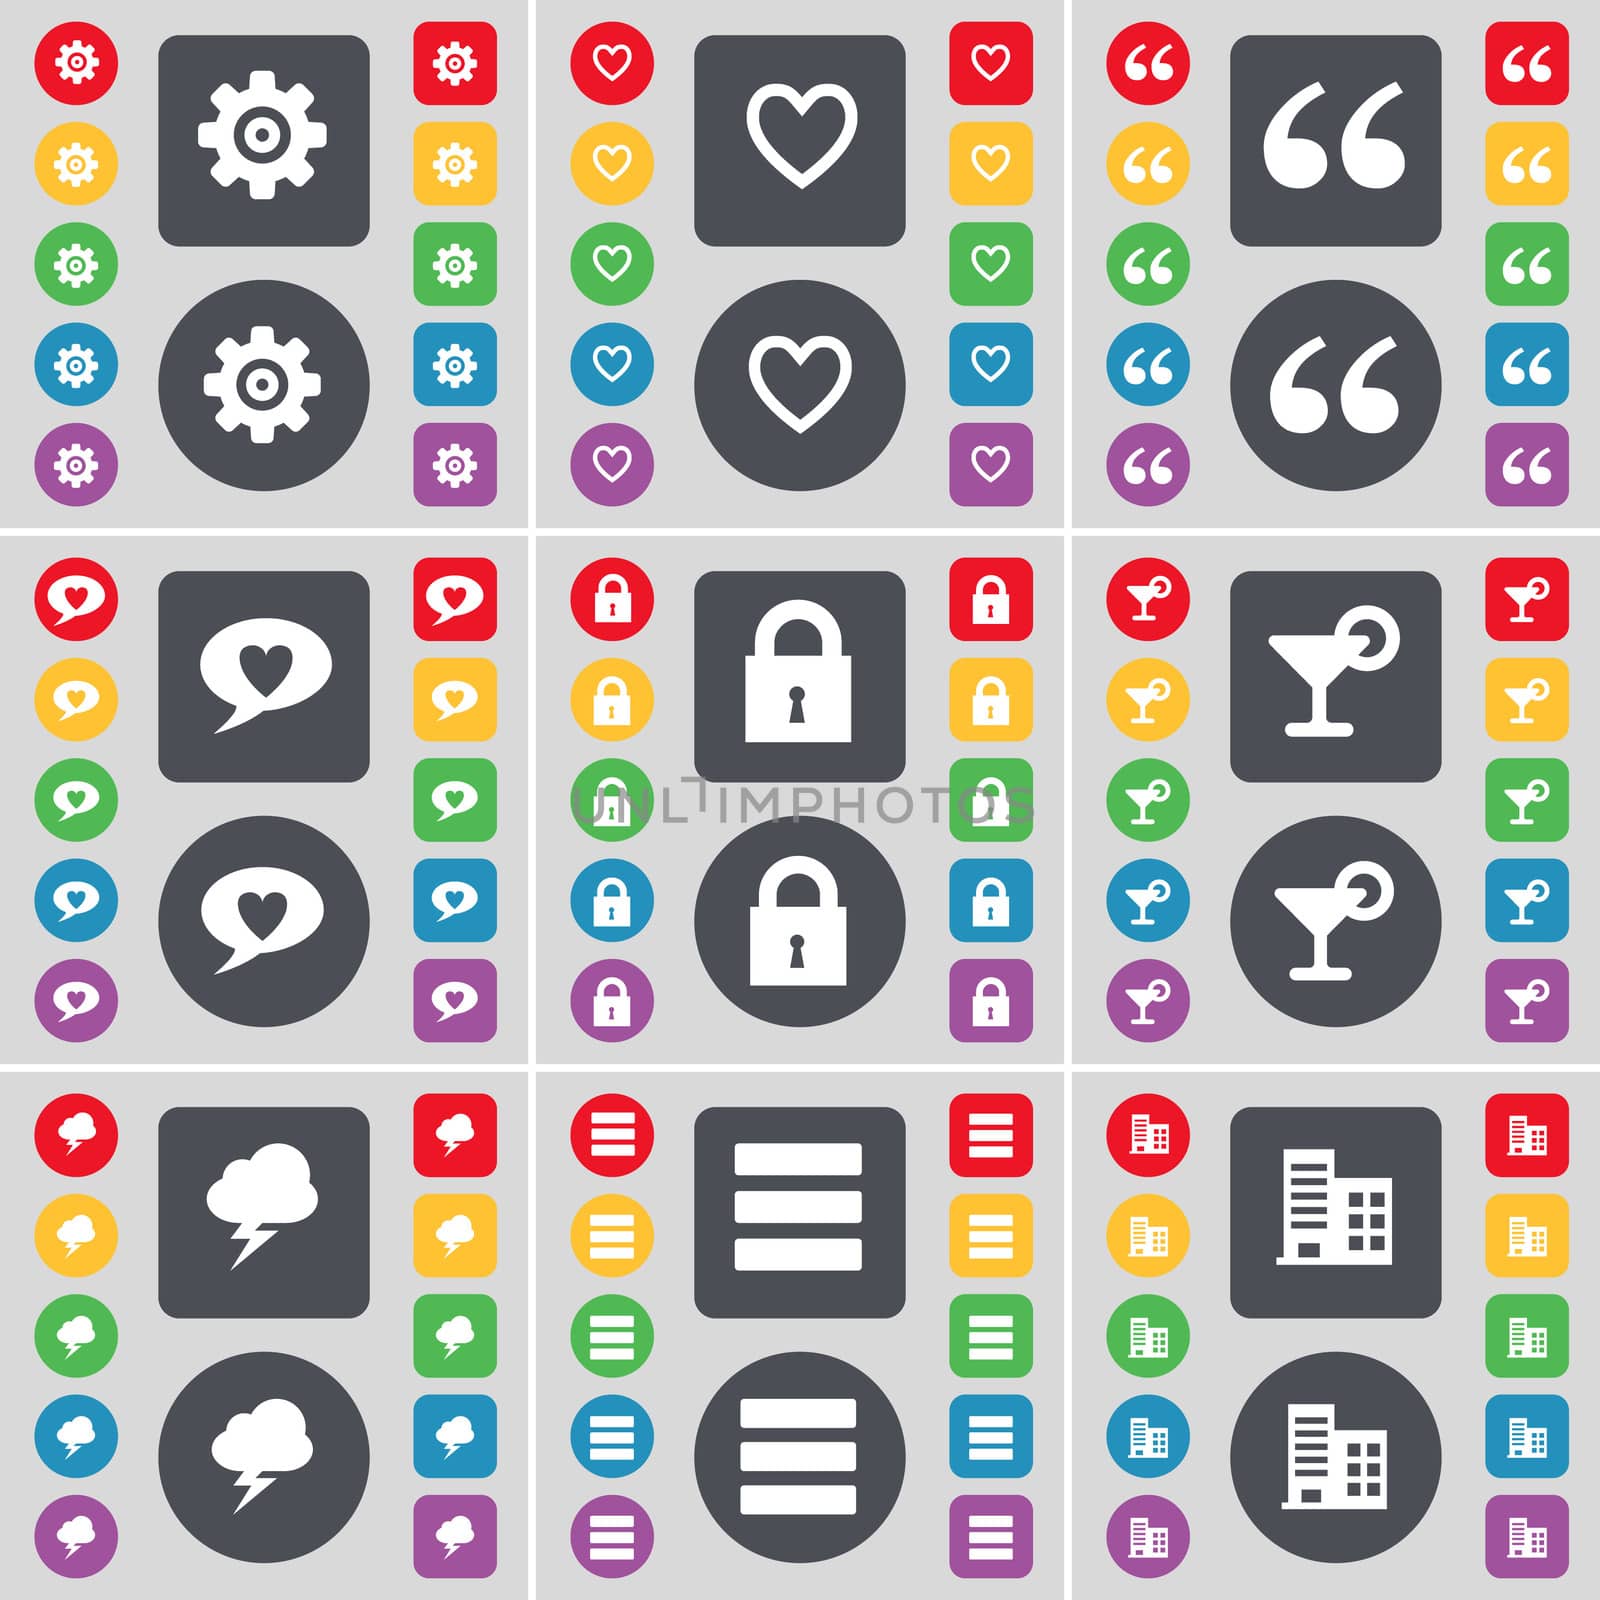 Gear, Heart, Quotation mark, Chat bubble, Lock, Cocktail, Lightning, Apps, Building icon symbol. A large set of flat, colored buttons for your design. illustration